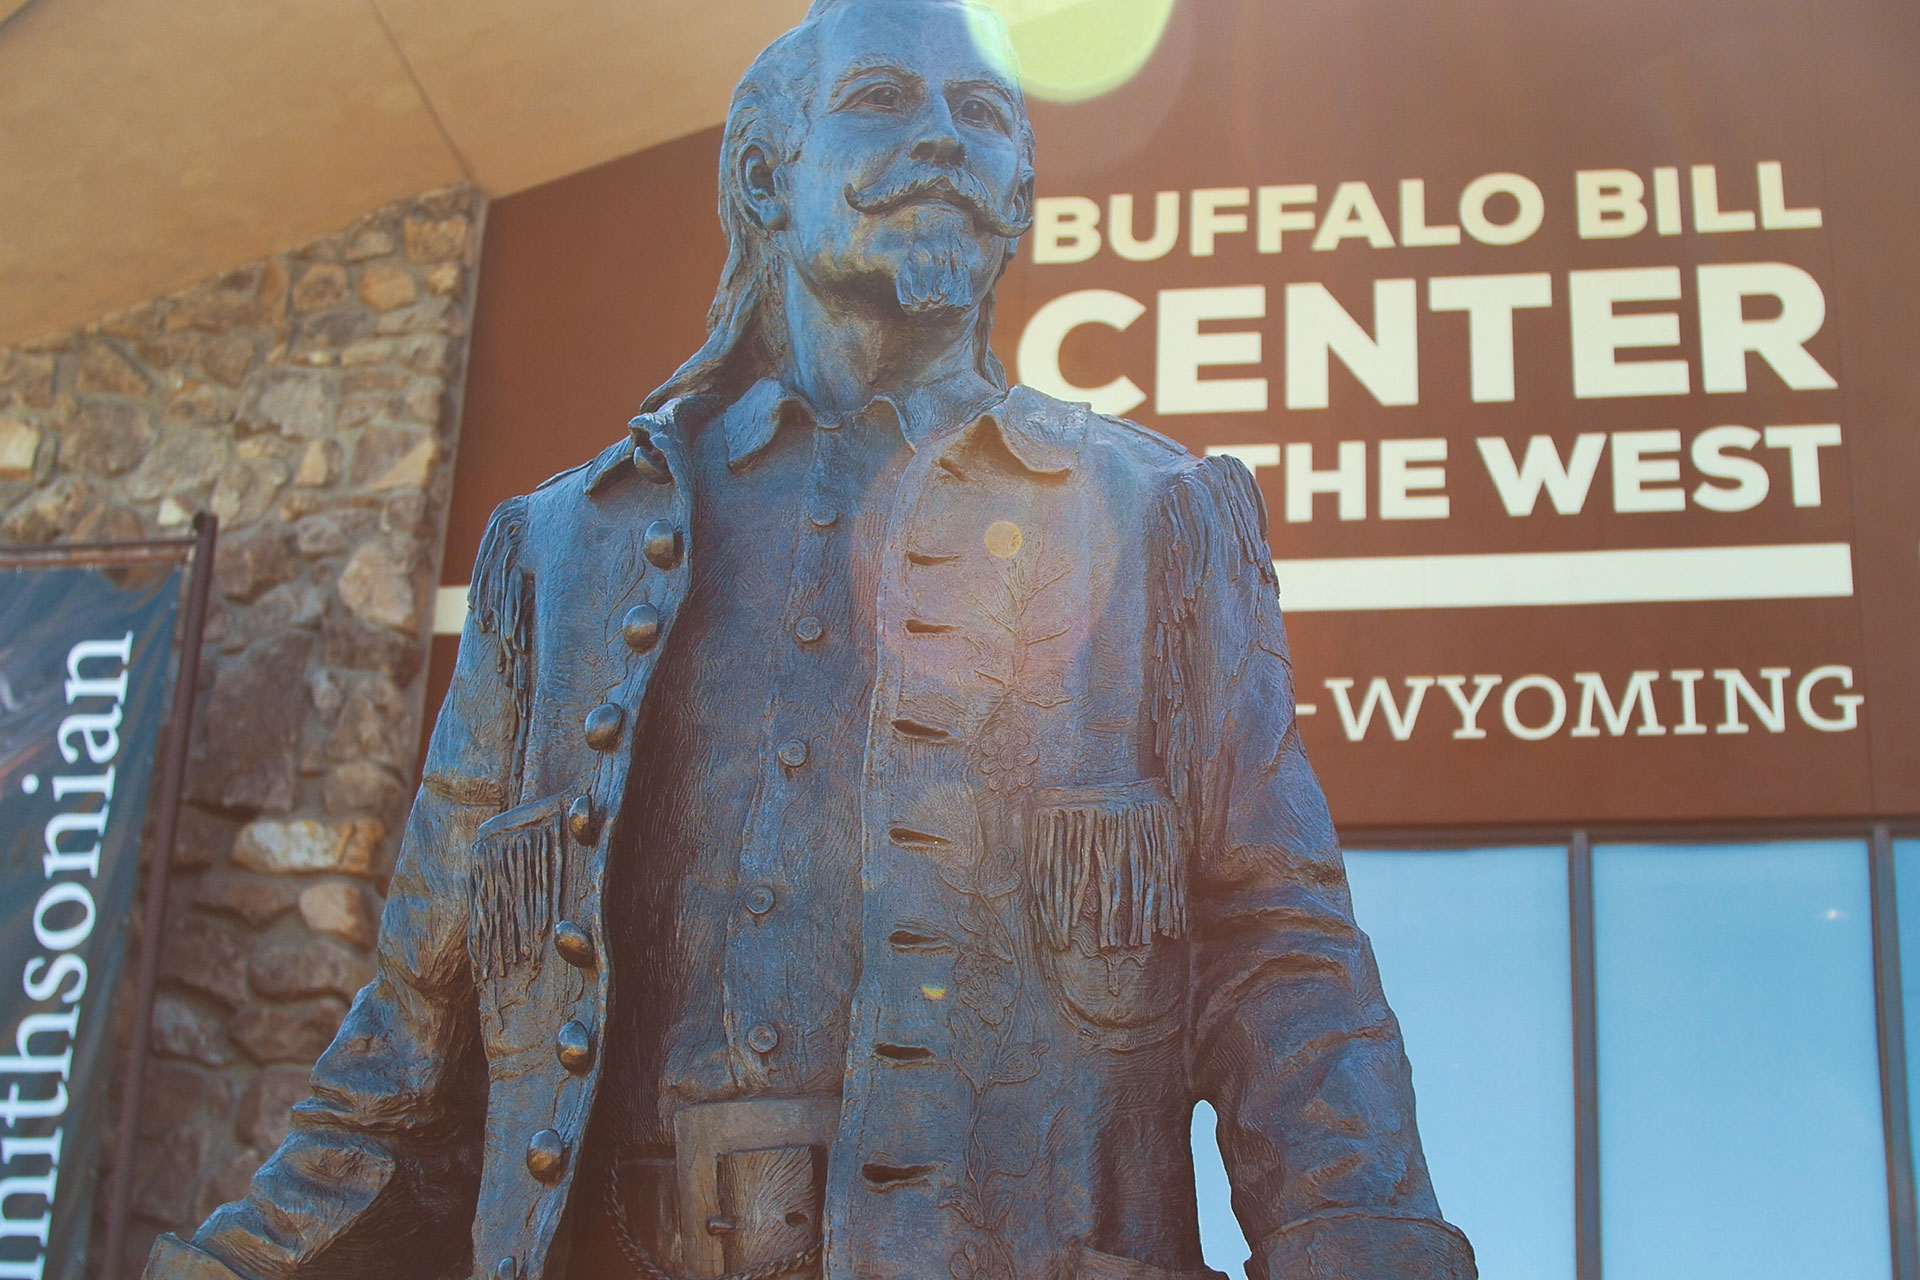 Buffalo Bill Center of the West in Cody